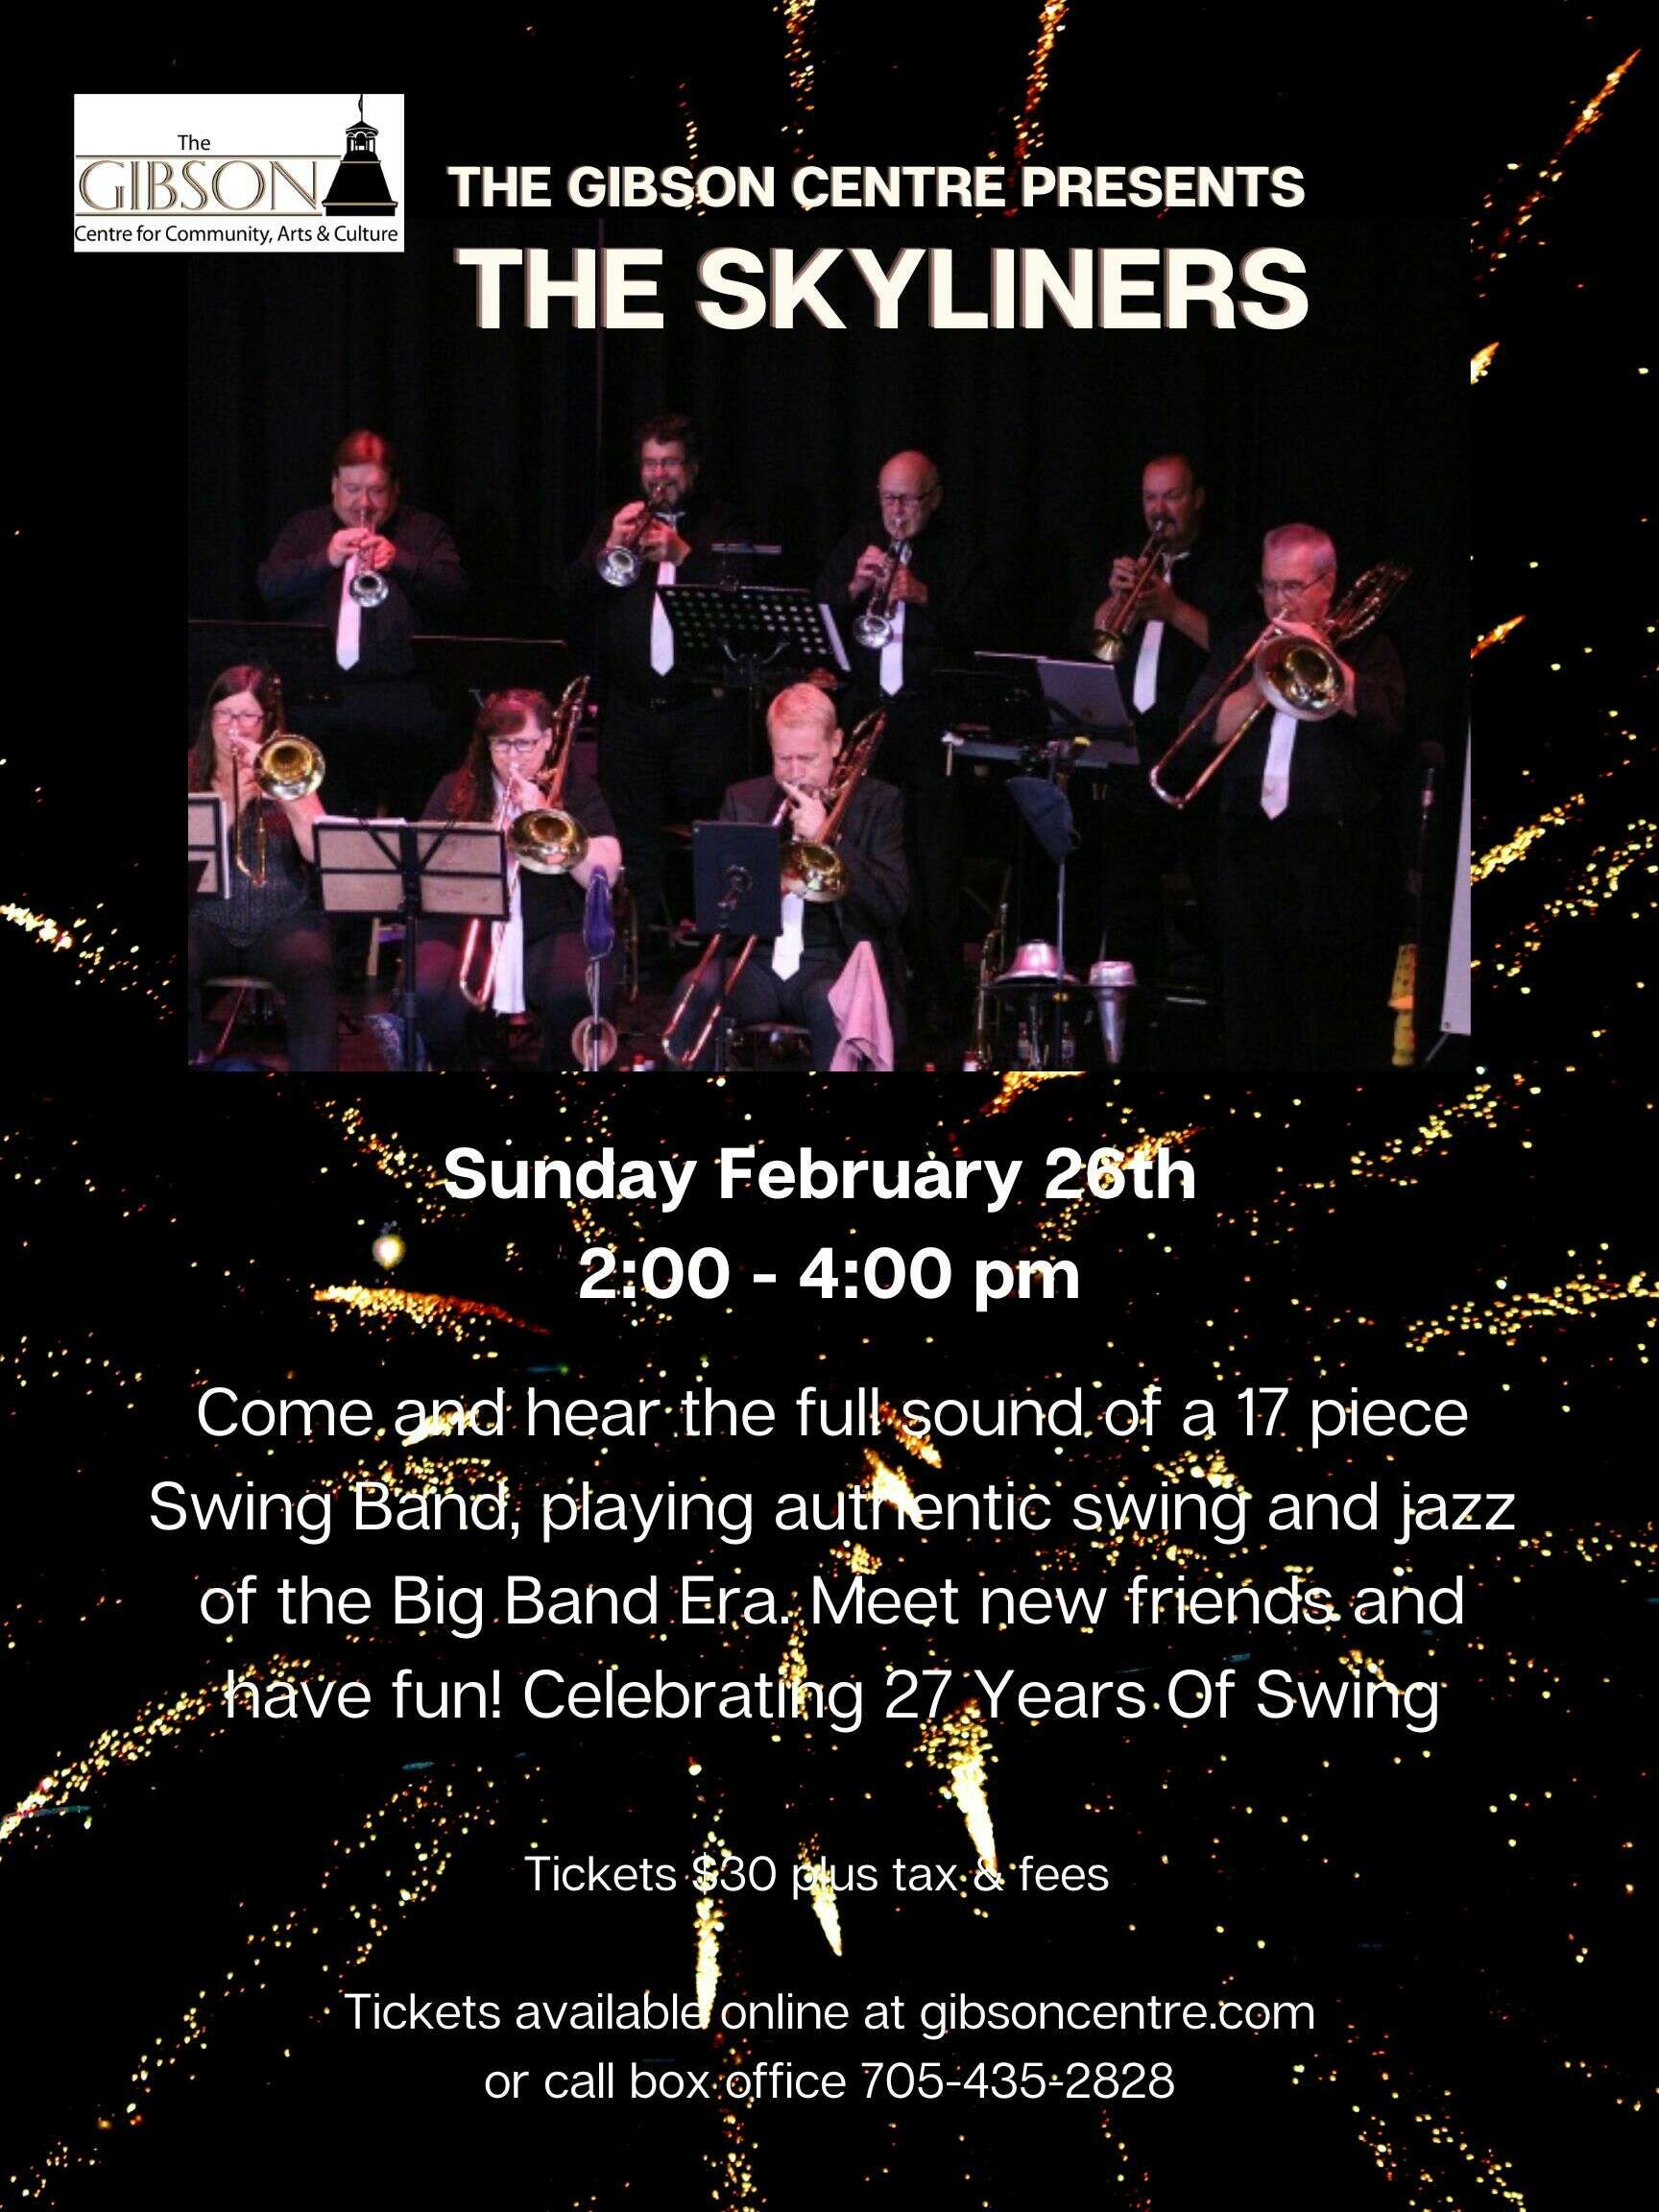 The Gibson Centre presents, "The Skyliners"